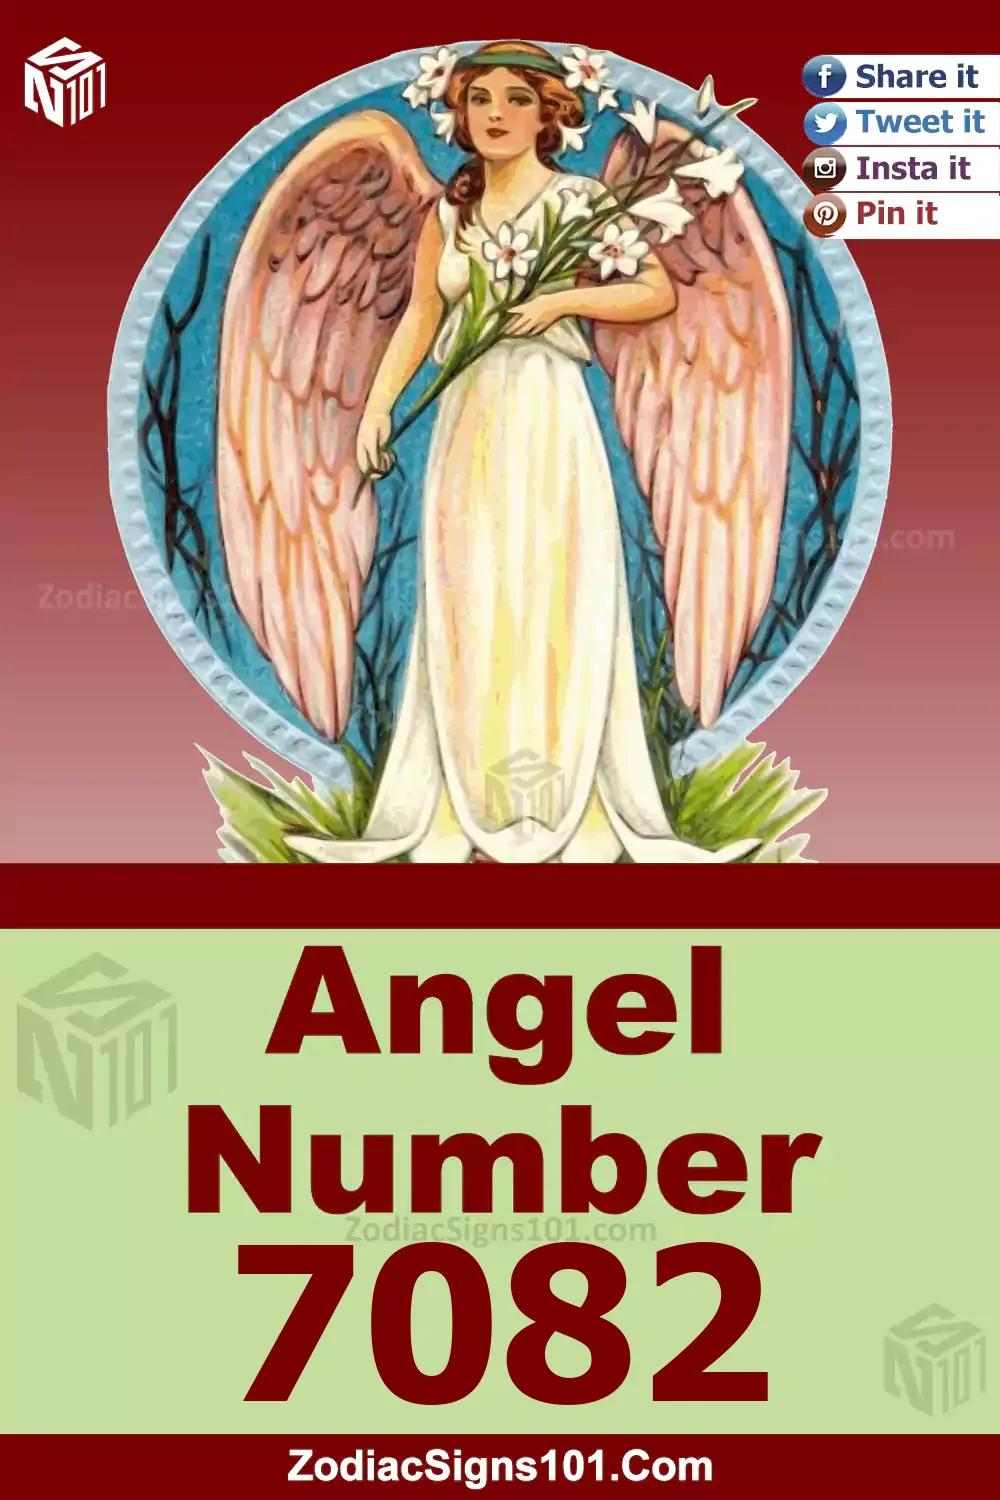 7082 Angel Number Meaning